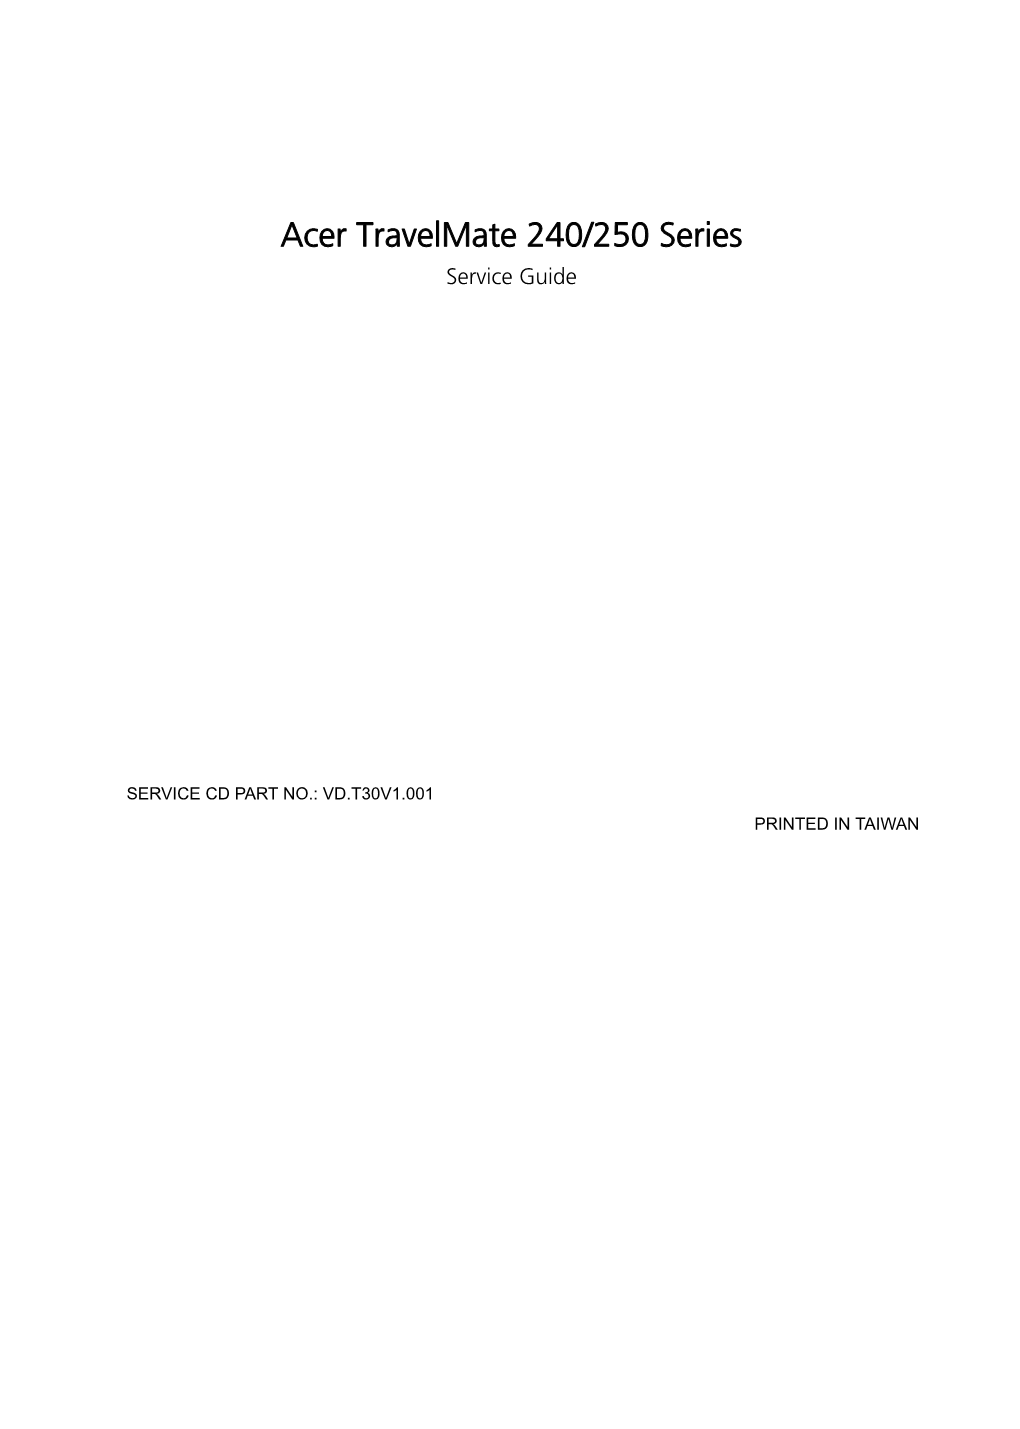 Acer Travelmate 240/250 Series Service Guide